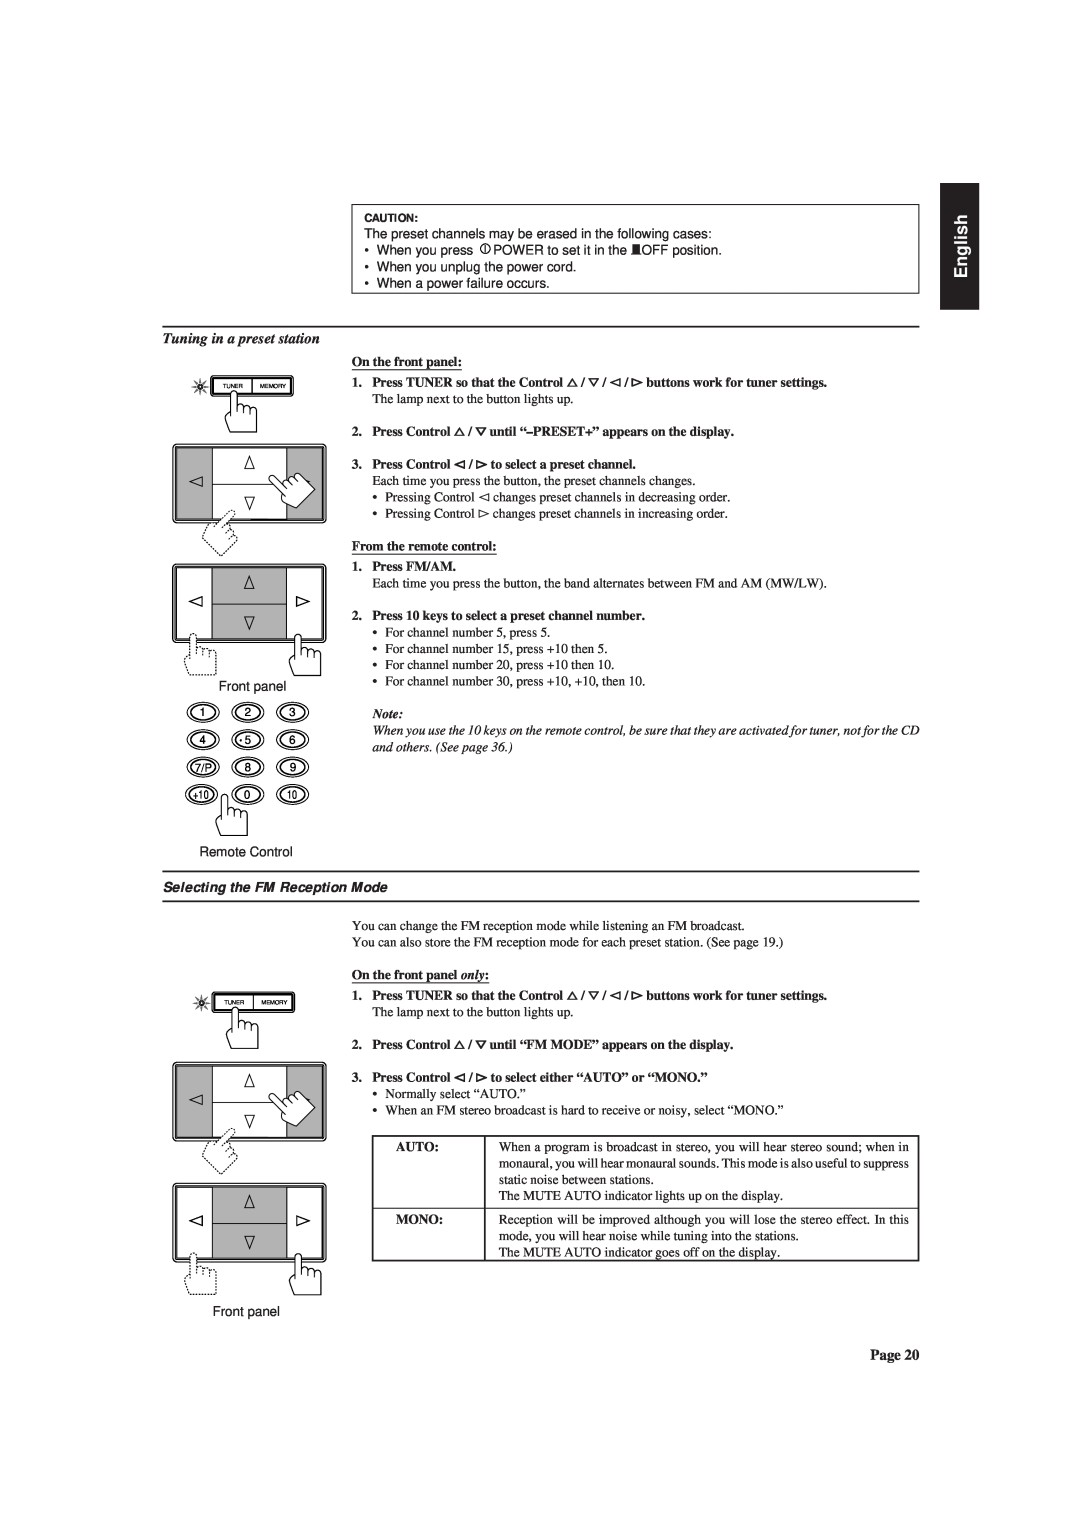 JVC RX-630RBK manual Selecting the FM Reception Mode, Tuning in a preset station, English 